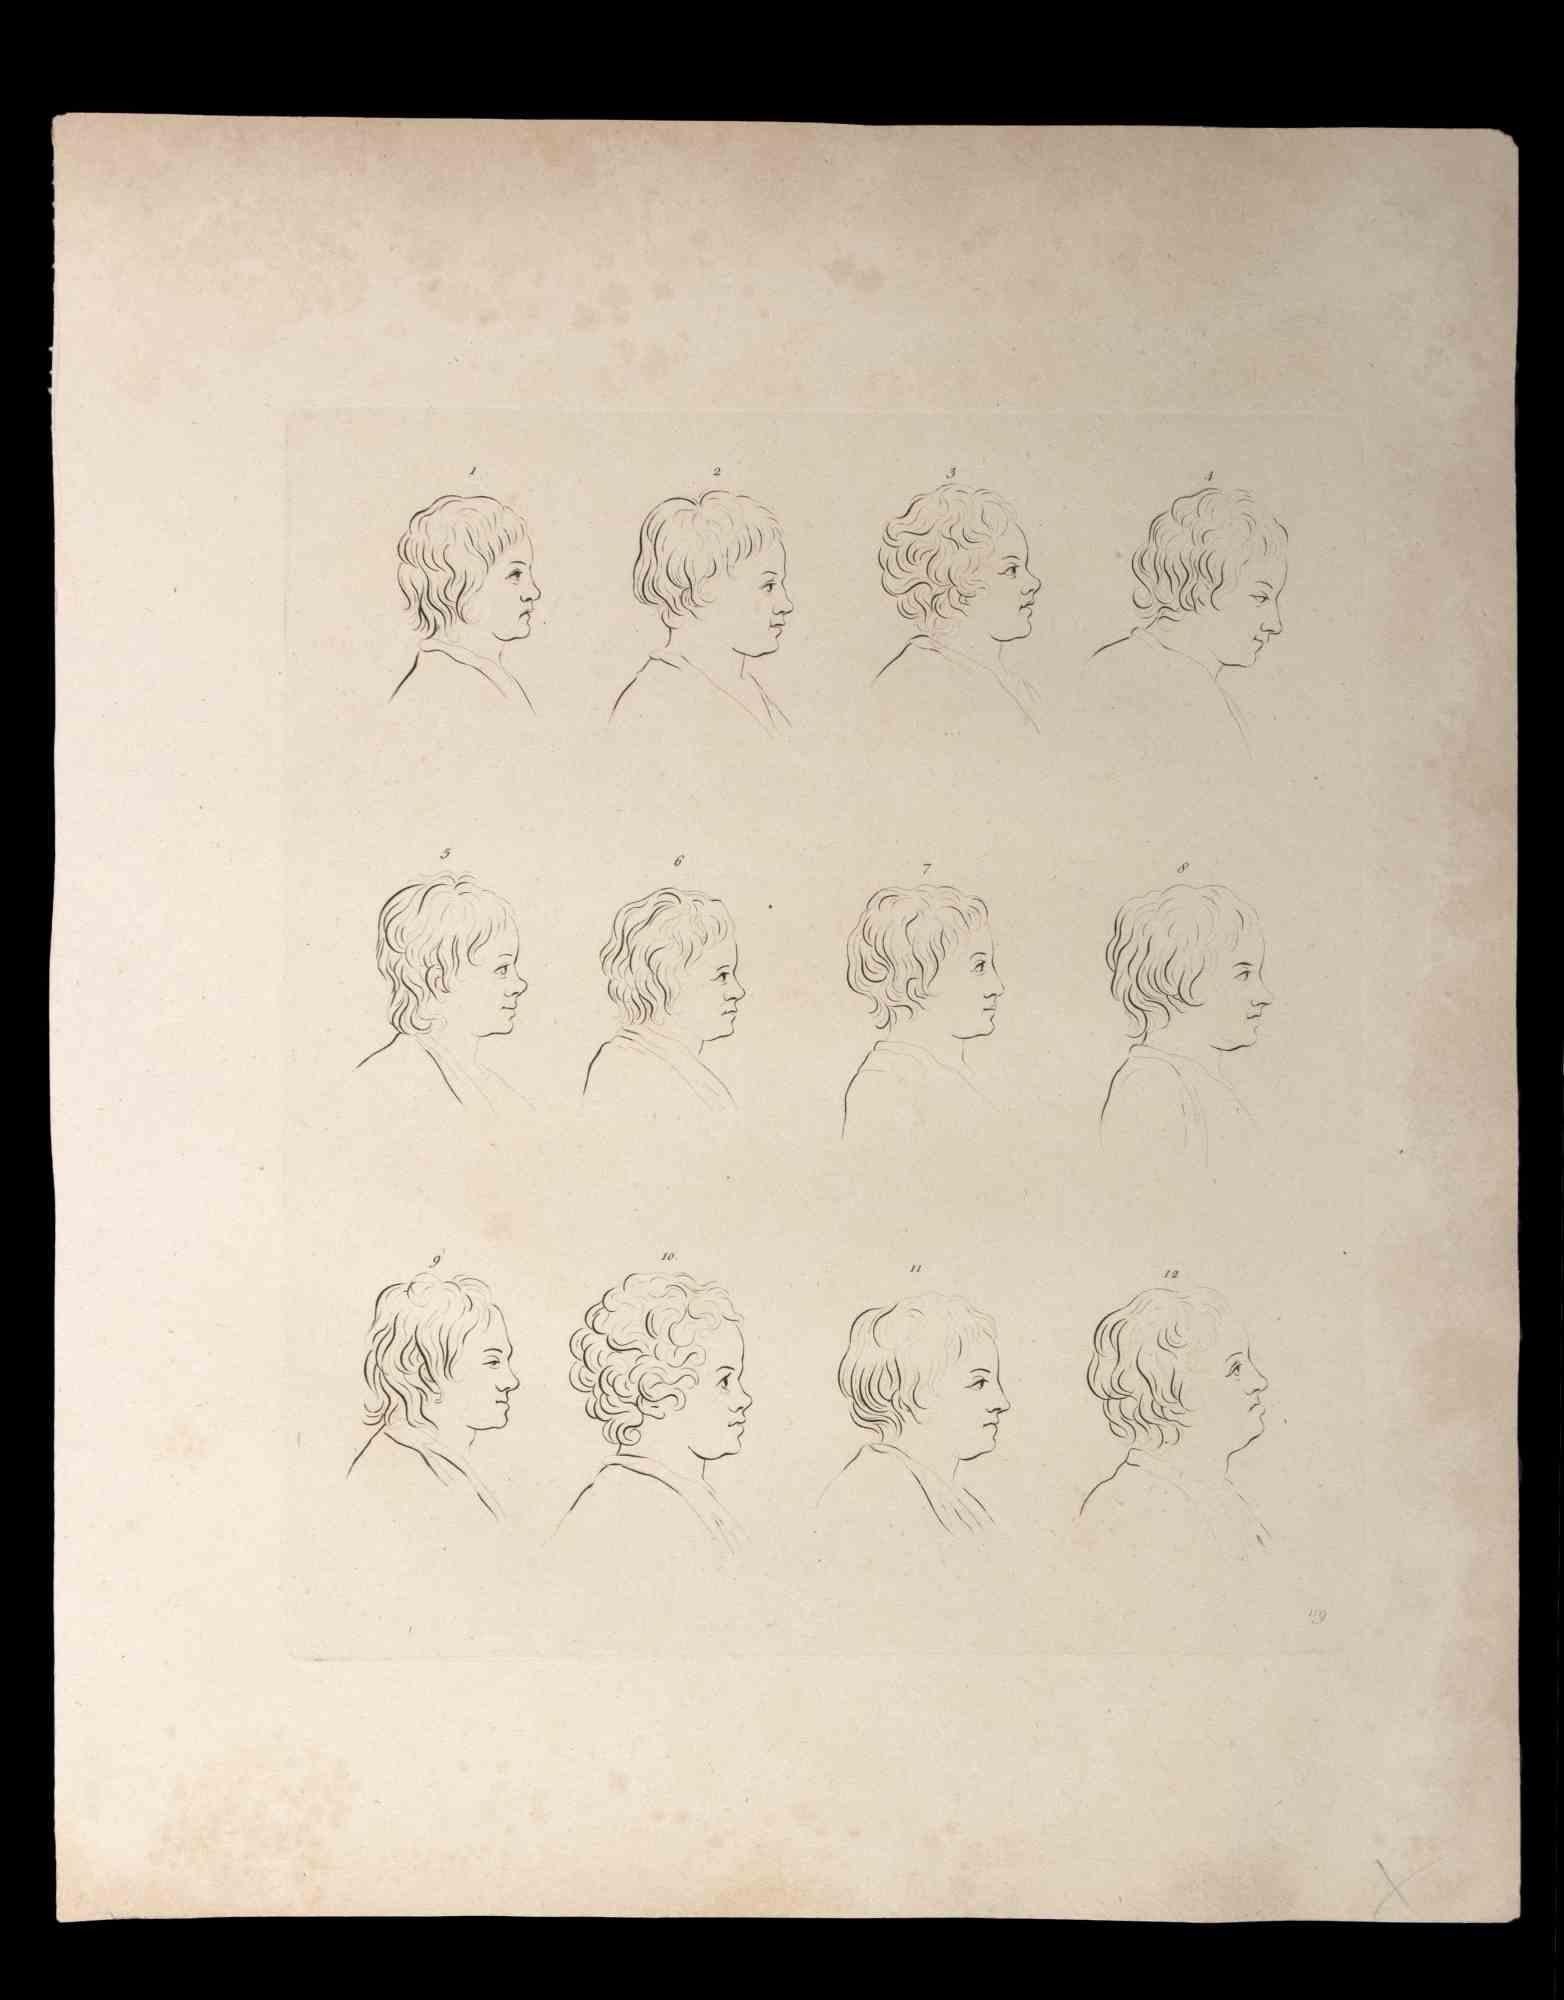 The profiles of men and women is an original etching artwork realized by Thomas Holloway for Johann Caspar Lavater's "Essays on Physiognomy, Designed to Promote the Knowledge and the Love of Mankind", London, Bensley, 1810. 

This artwork represents